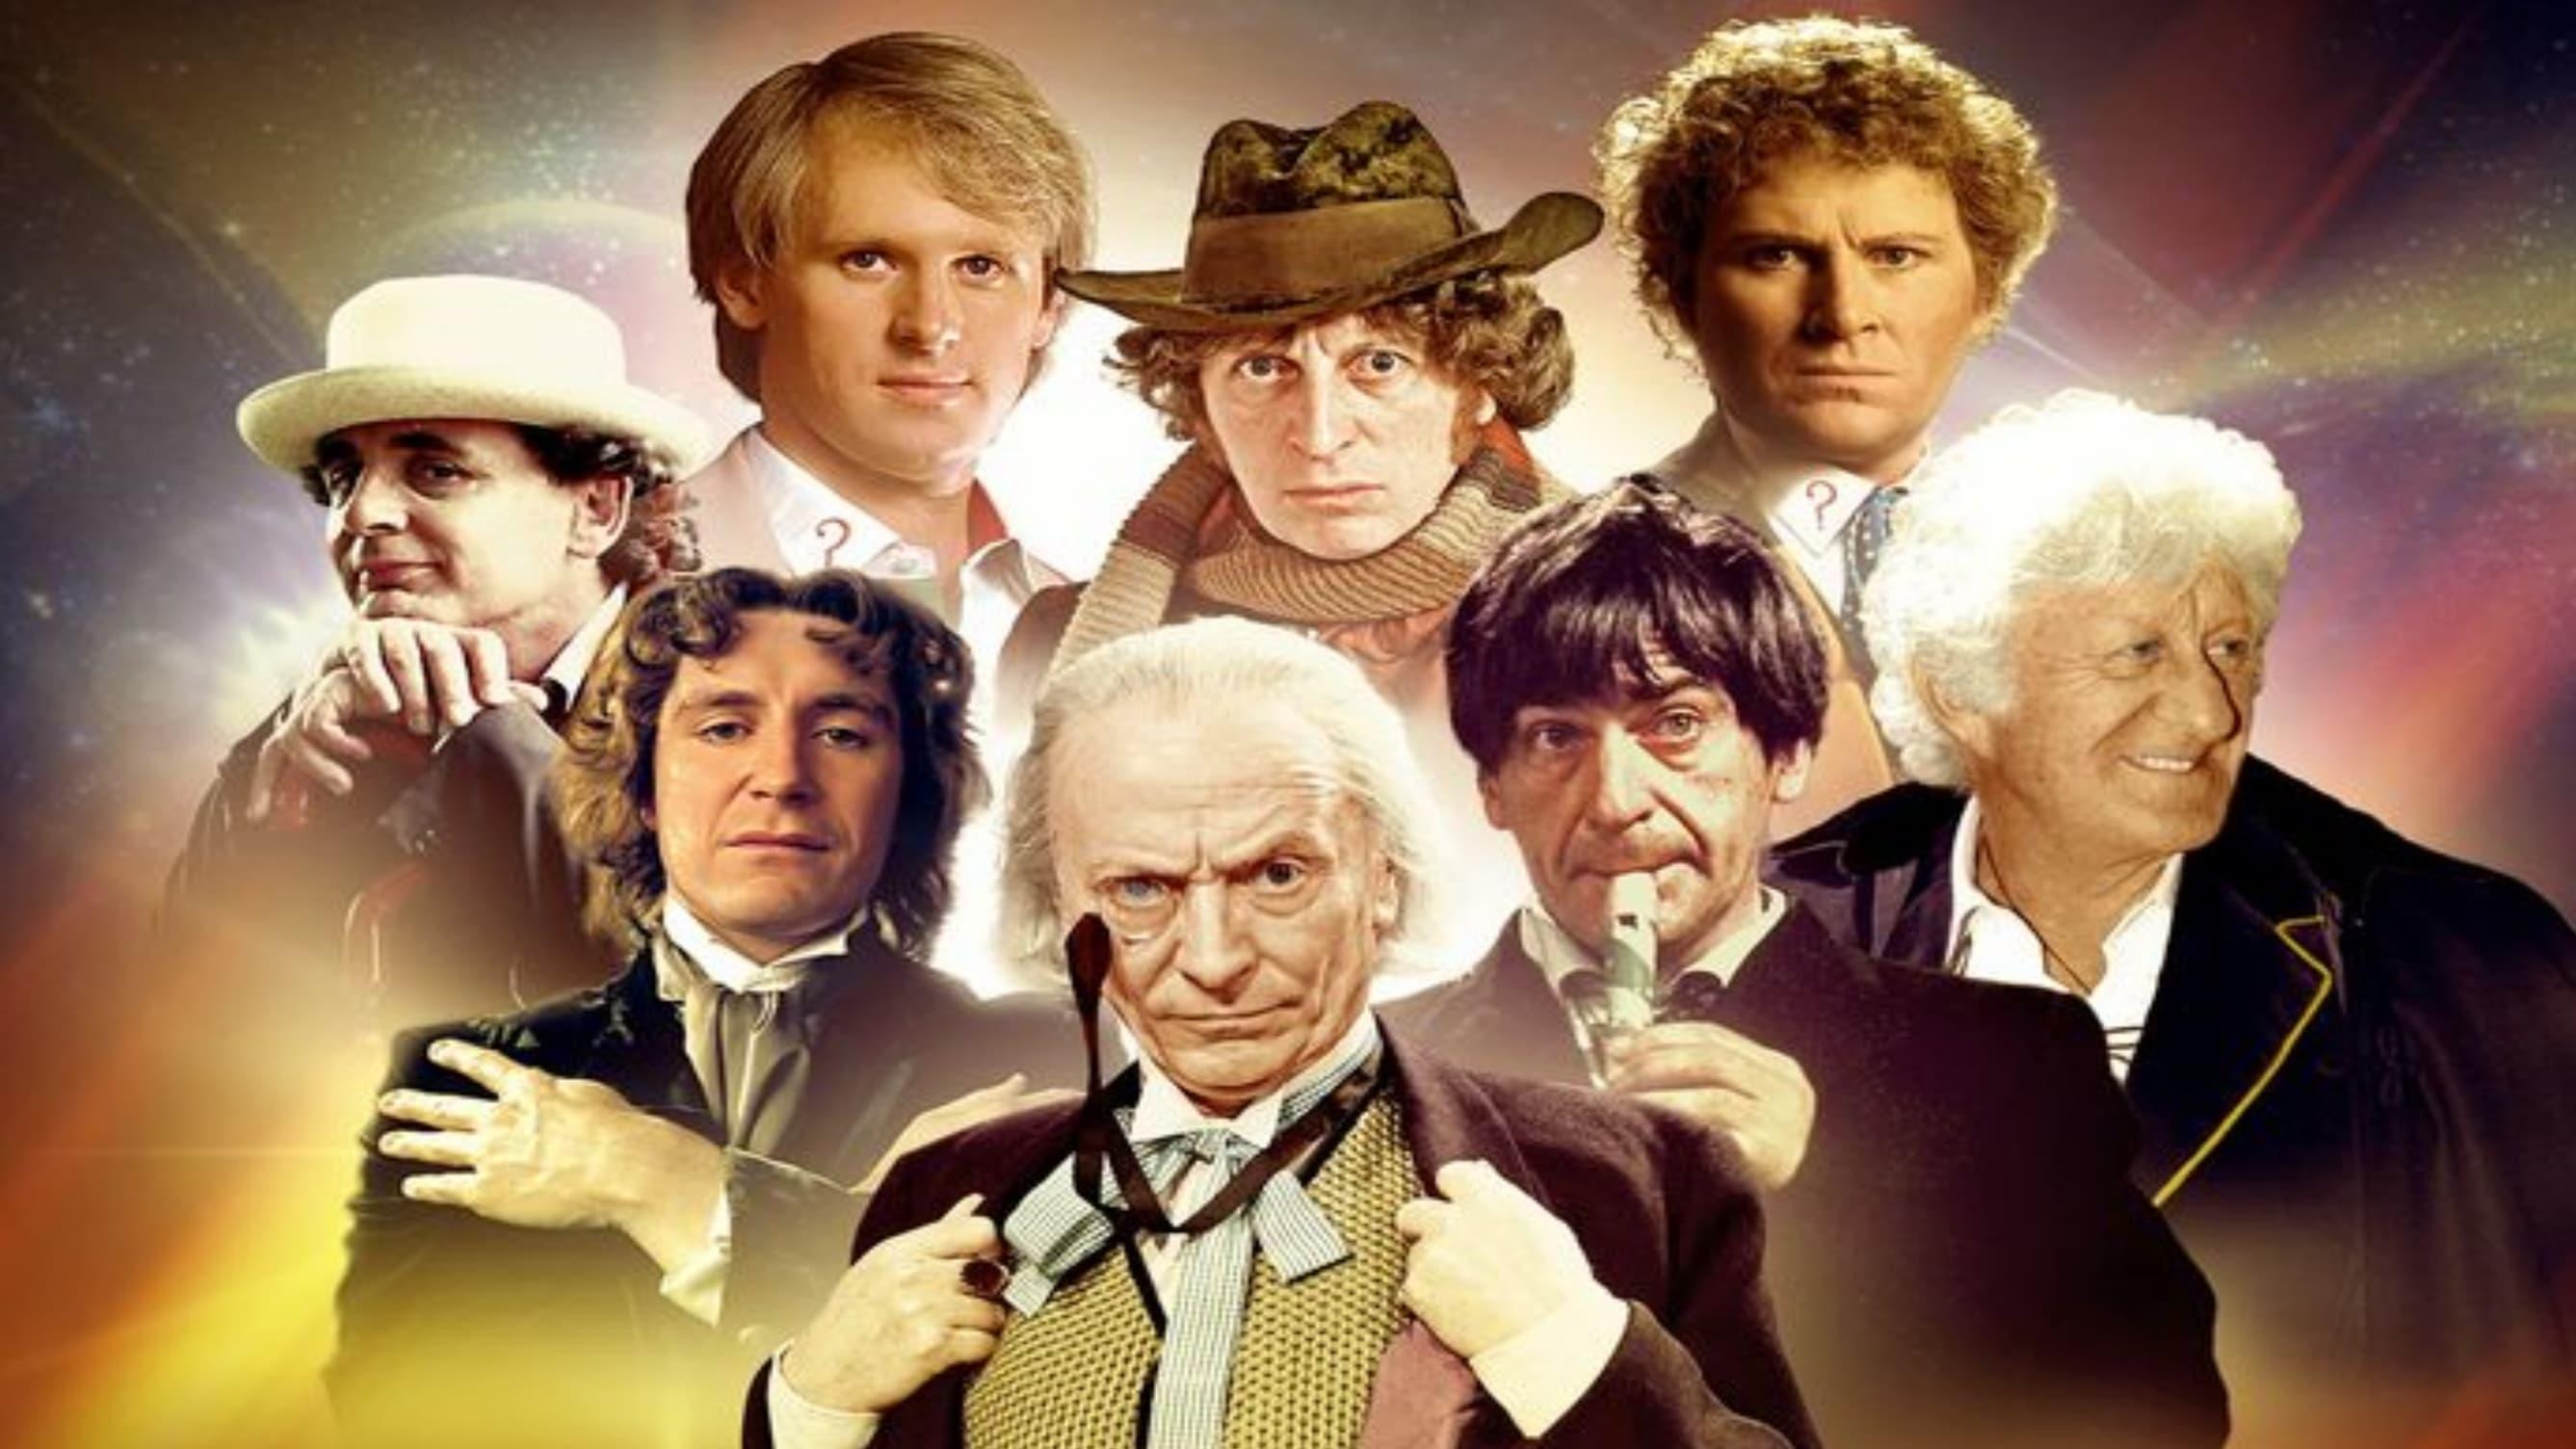 The Doctors: The Jon Pertwee Years backdrop